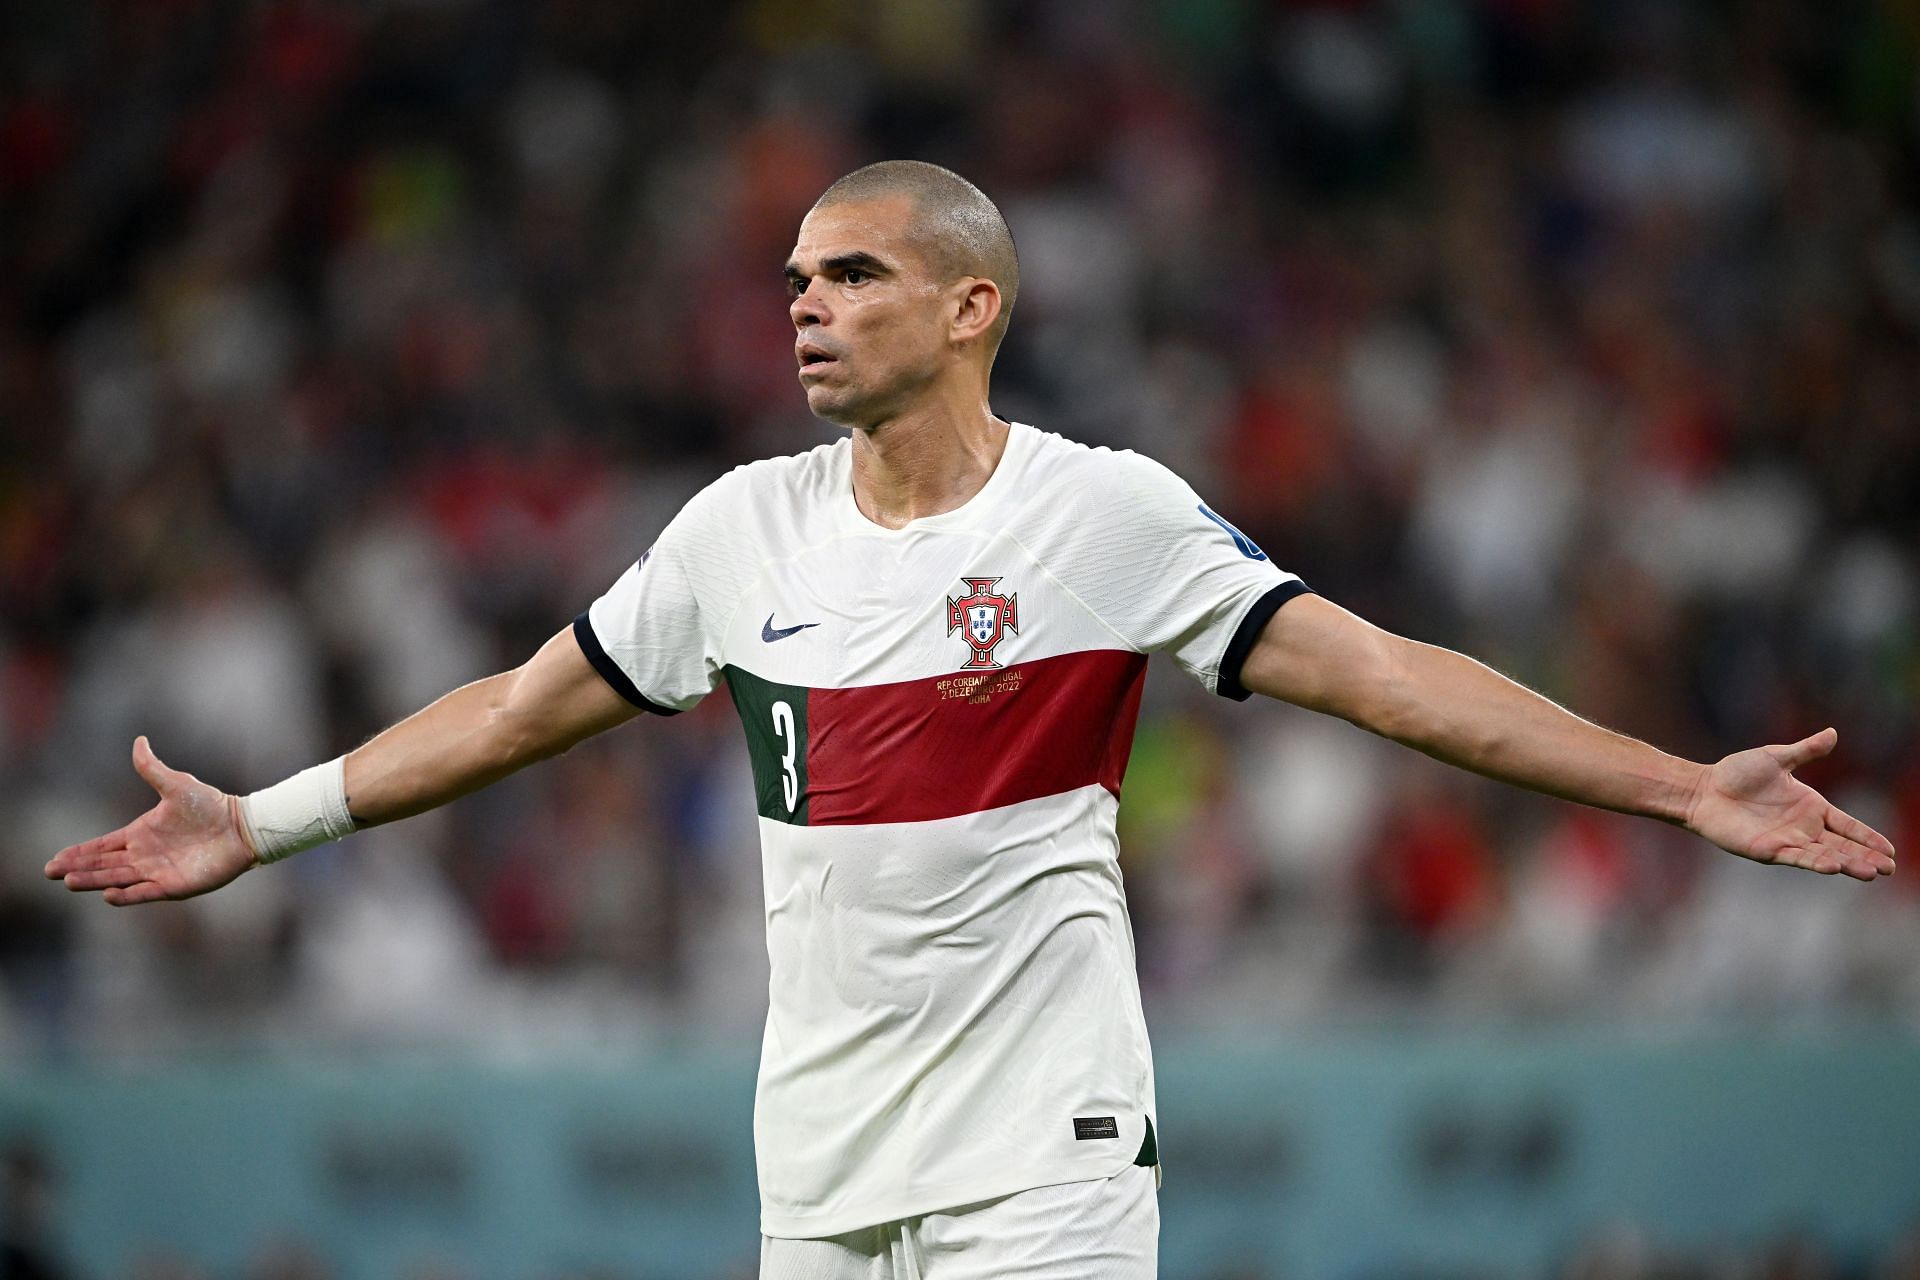 Should Pepe retire after the 2022 FIFA World Cup, he will do so as a bonafide Portugal legend